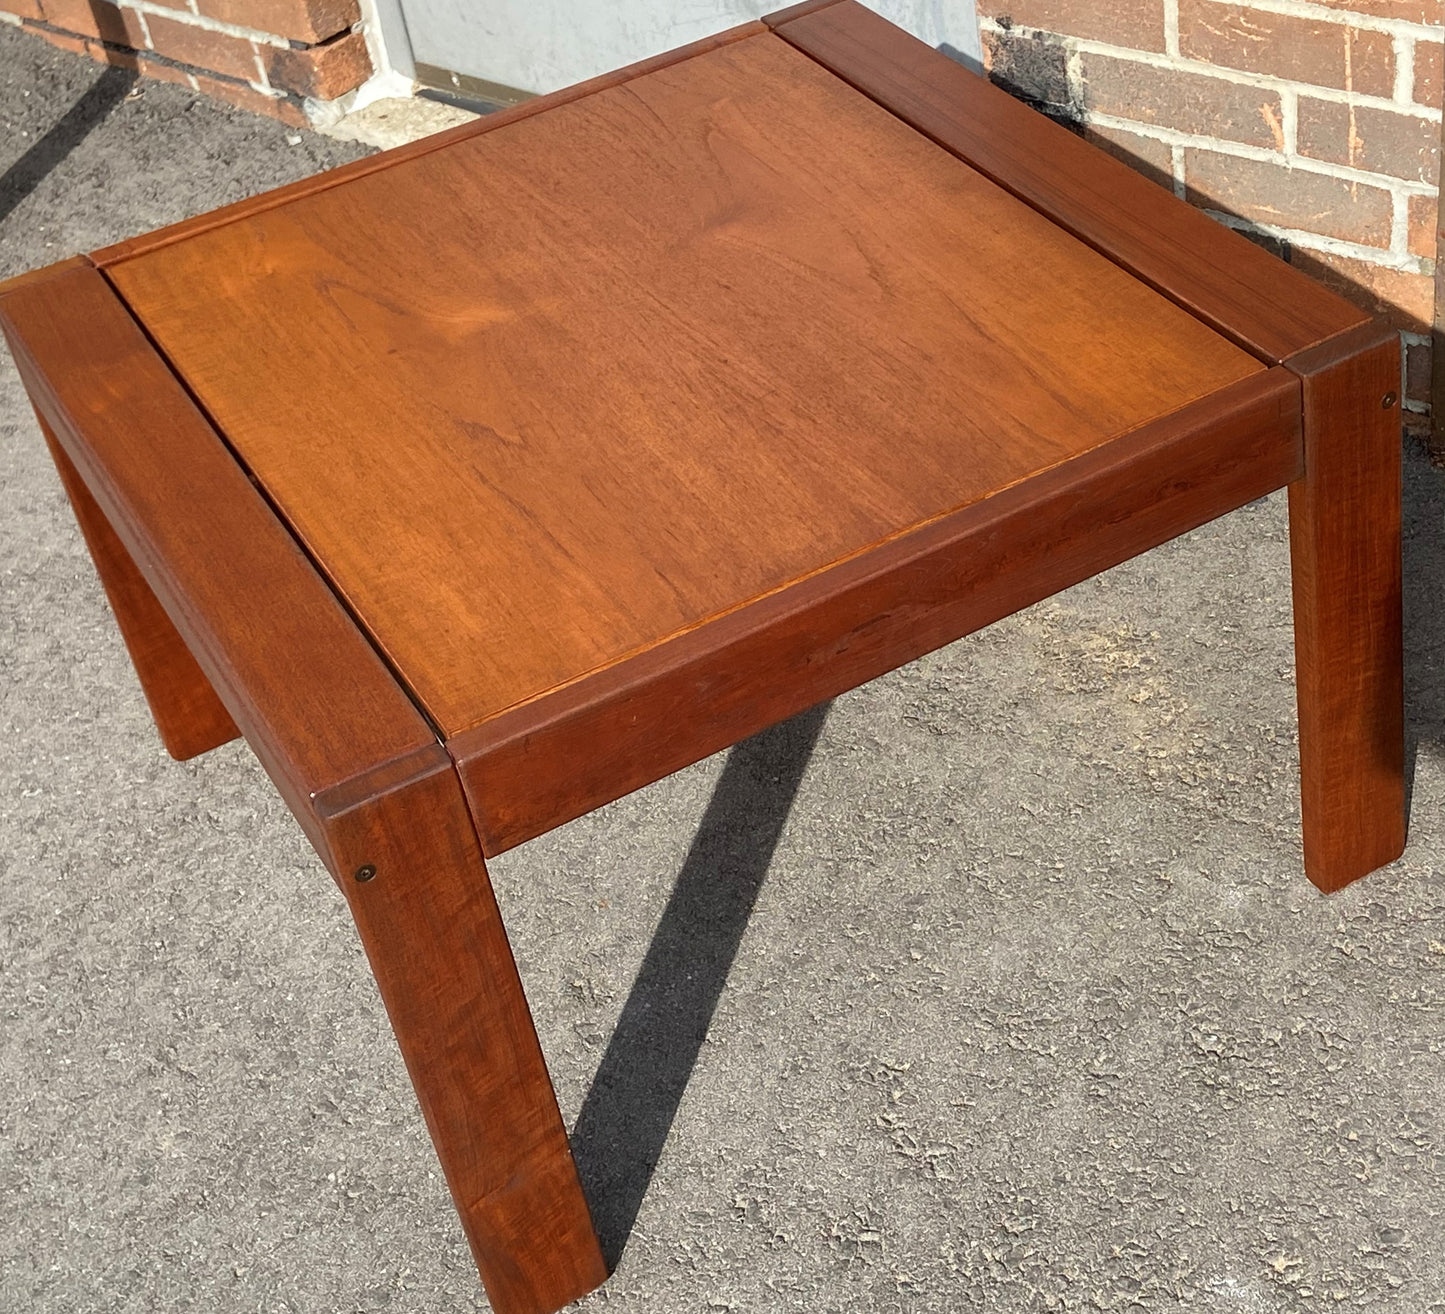 REFINISHED MCM Teak Coffee or Accent Table, Square 29"